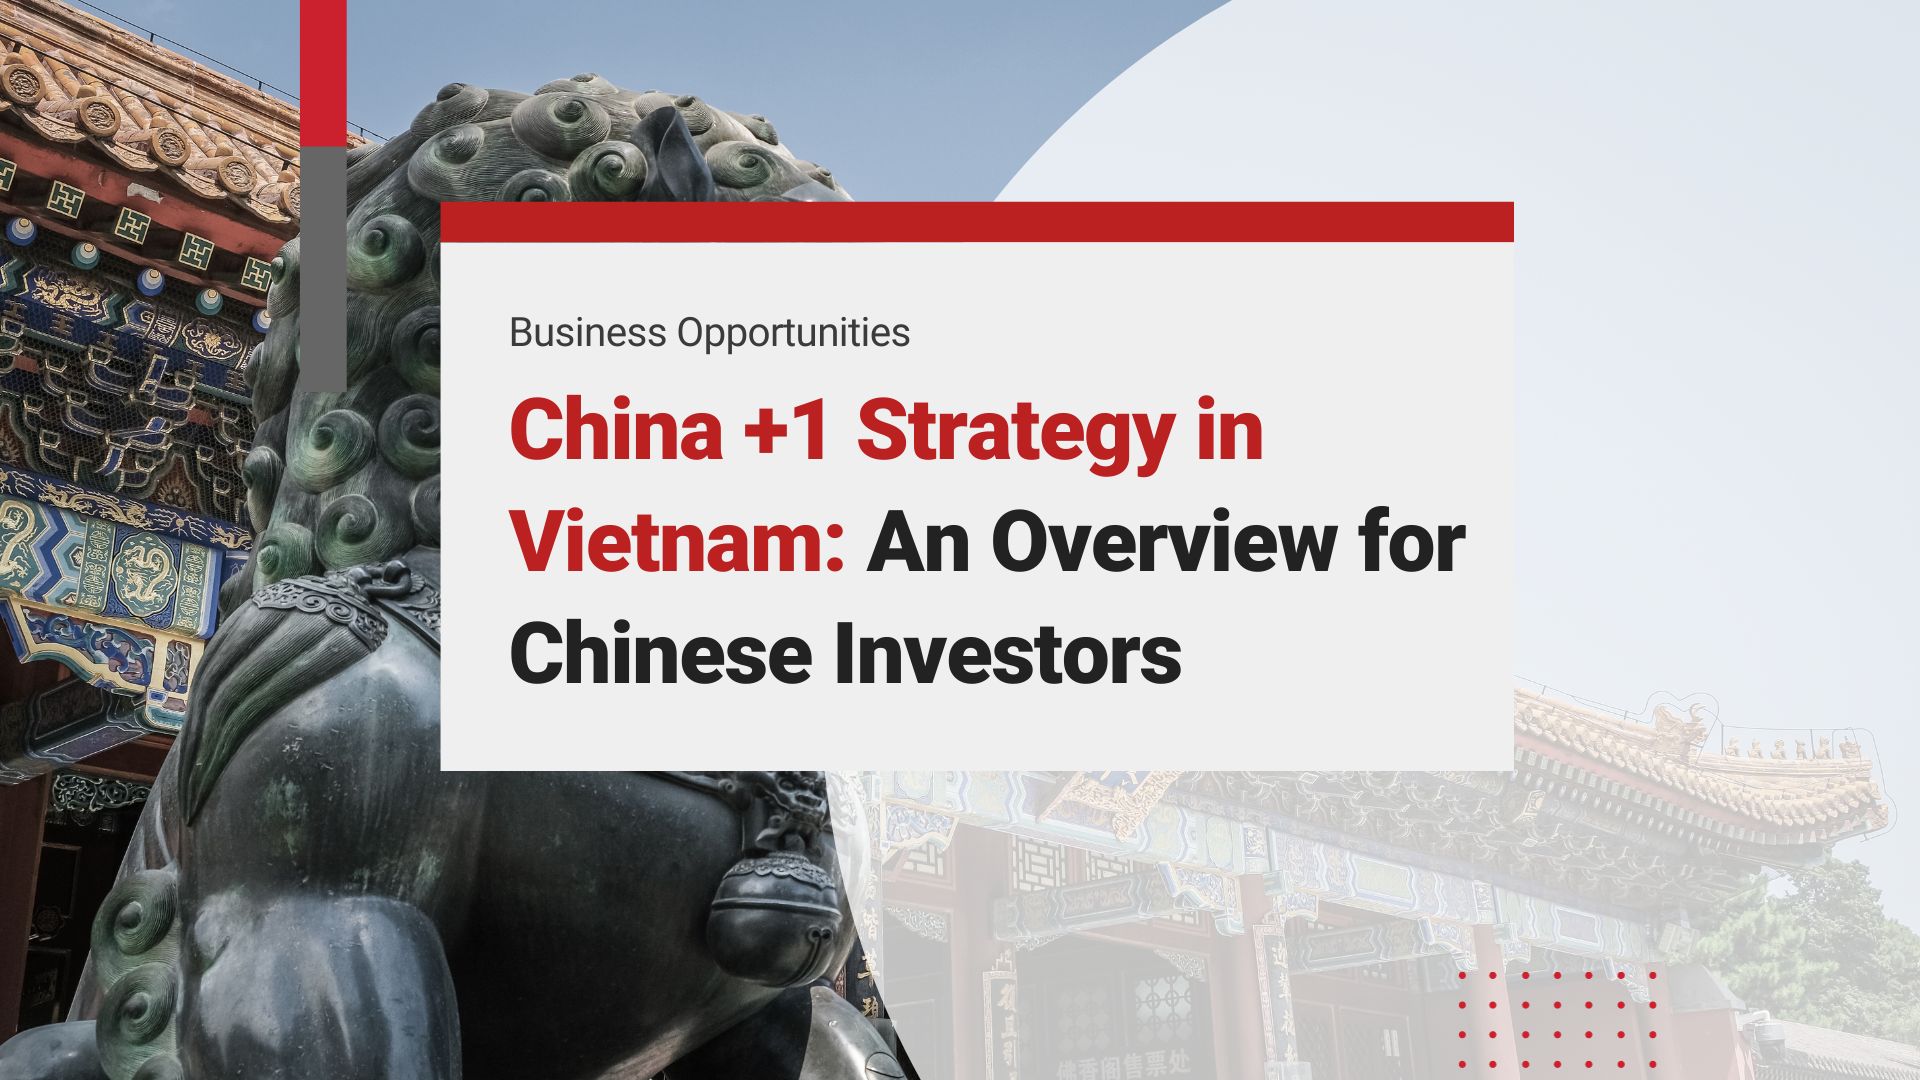 China +1 Strategy in Vietnam: An Overview for Chinese Investors